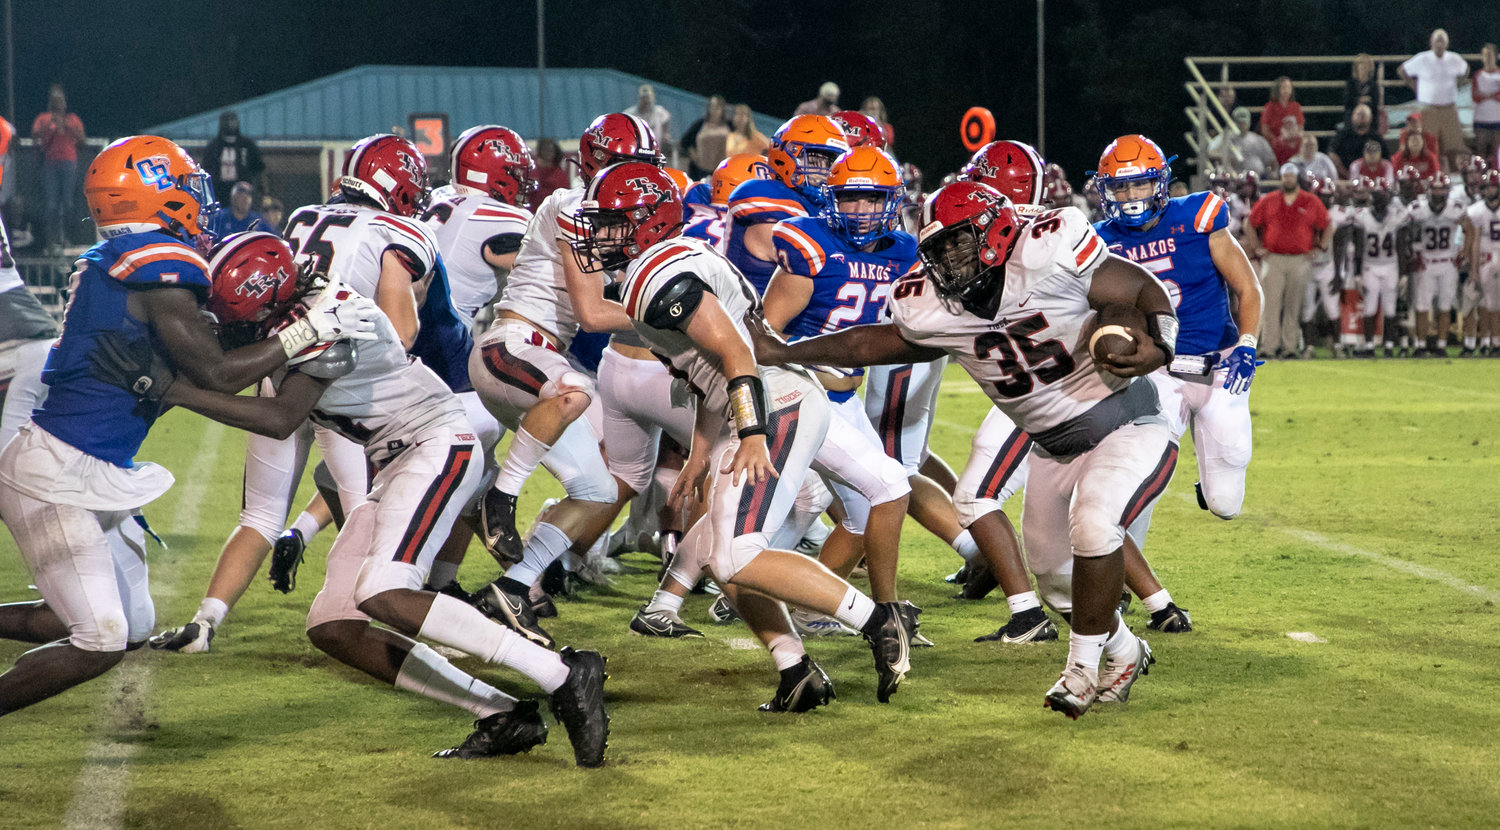 T.R. Miller senior Damorae Fountain looks for running room during the Tigers’ away game within Class 4A Region 1 against the Orange Beach Makos Friday night. Fountain helped lead the T.R. Miller run game with 16 carries on the night.